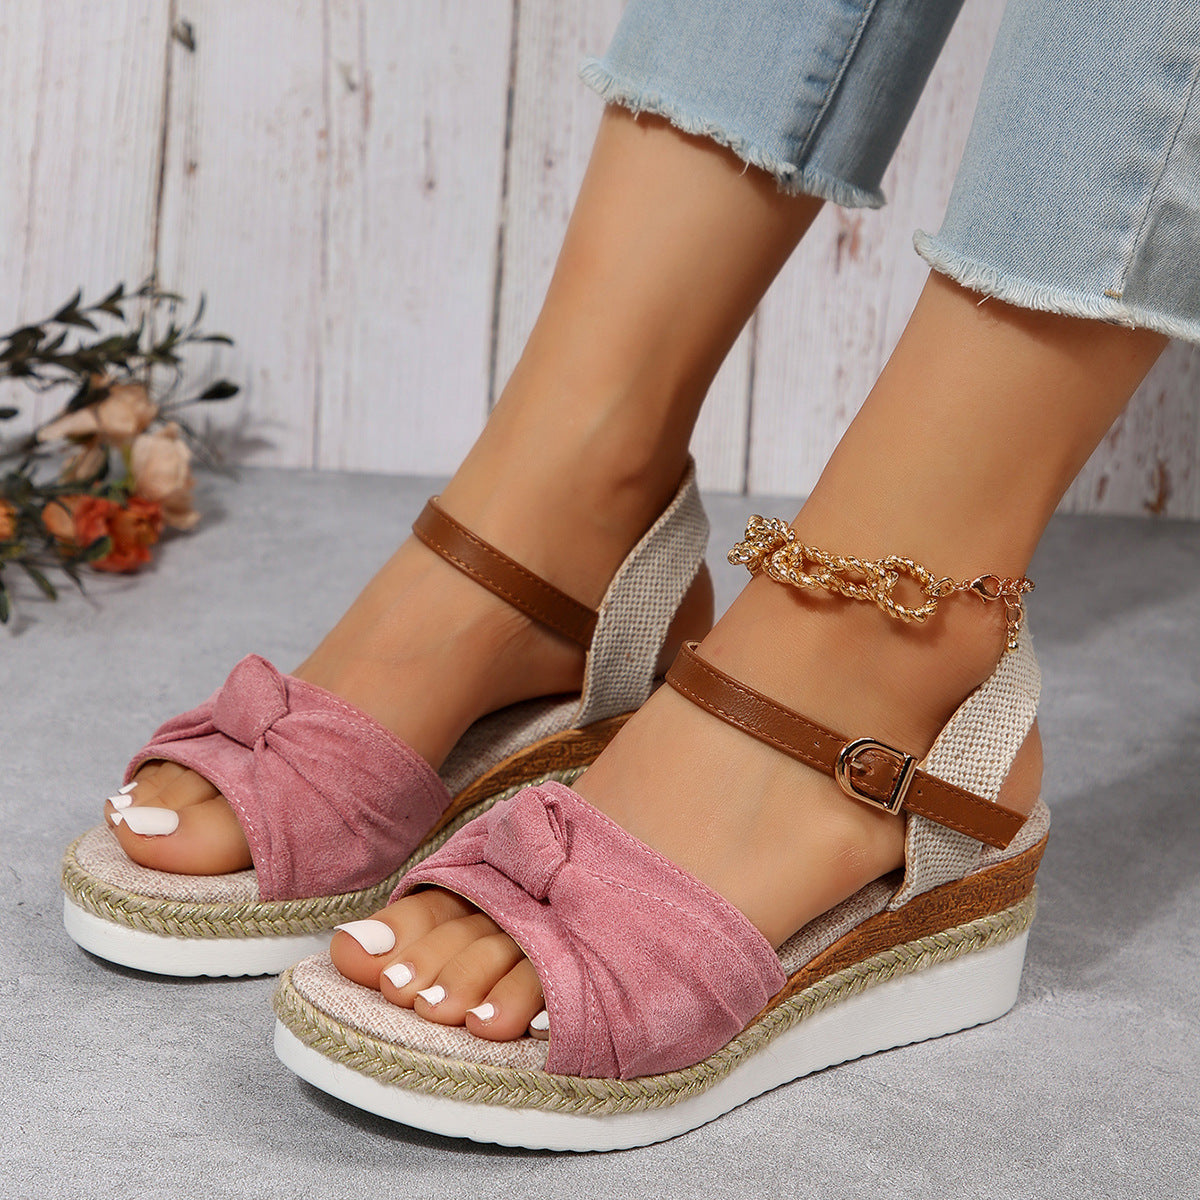 New Thick-soled Bow Sandals Summer Fashion Casual Linen Buckle Wedges Shoes For Women